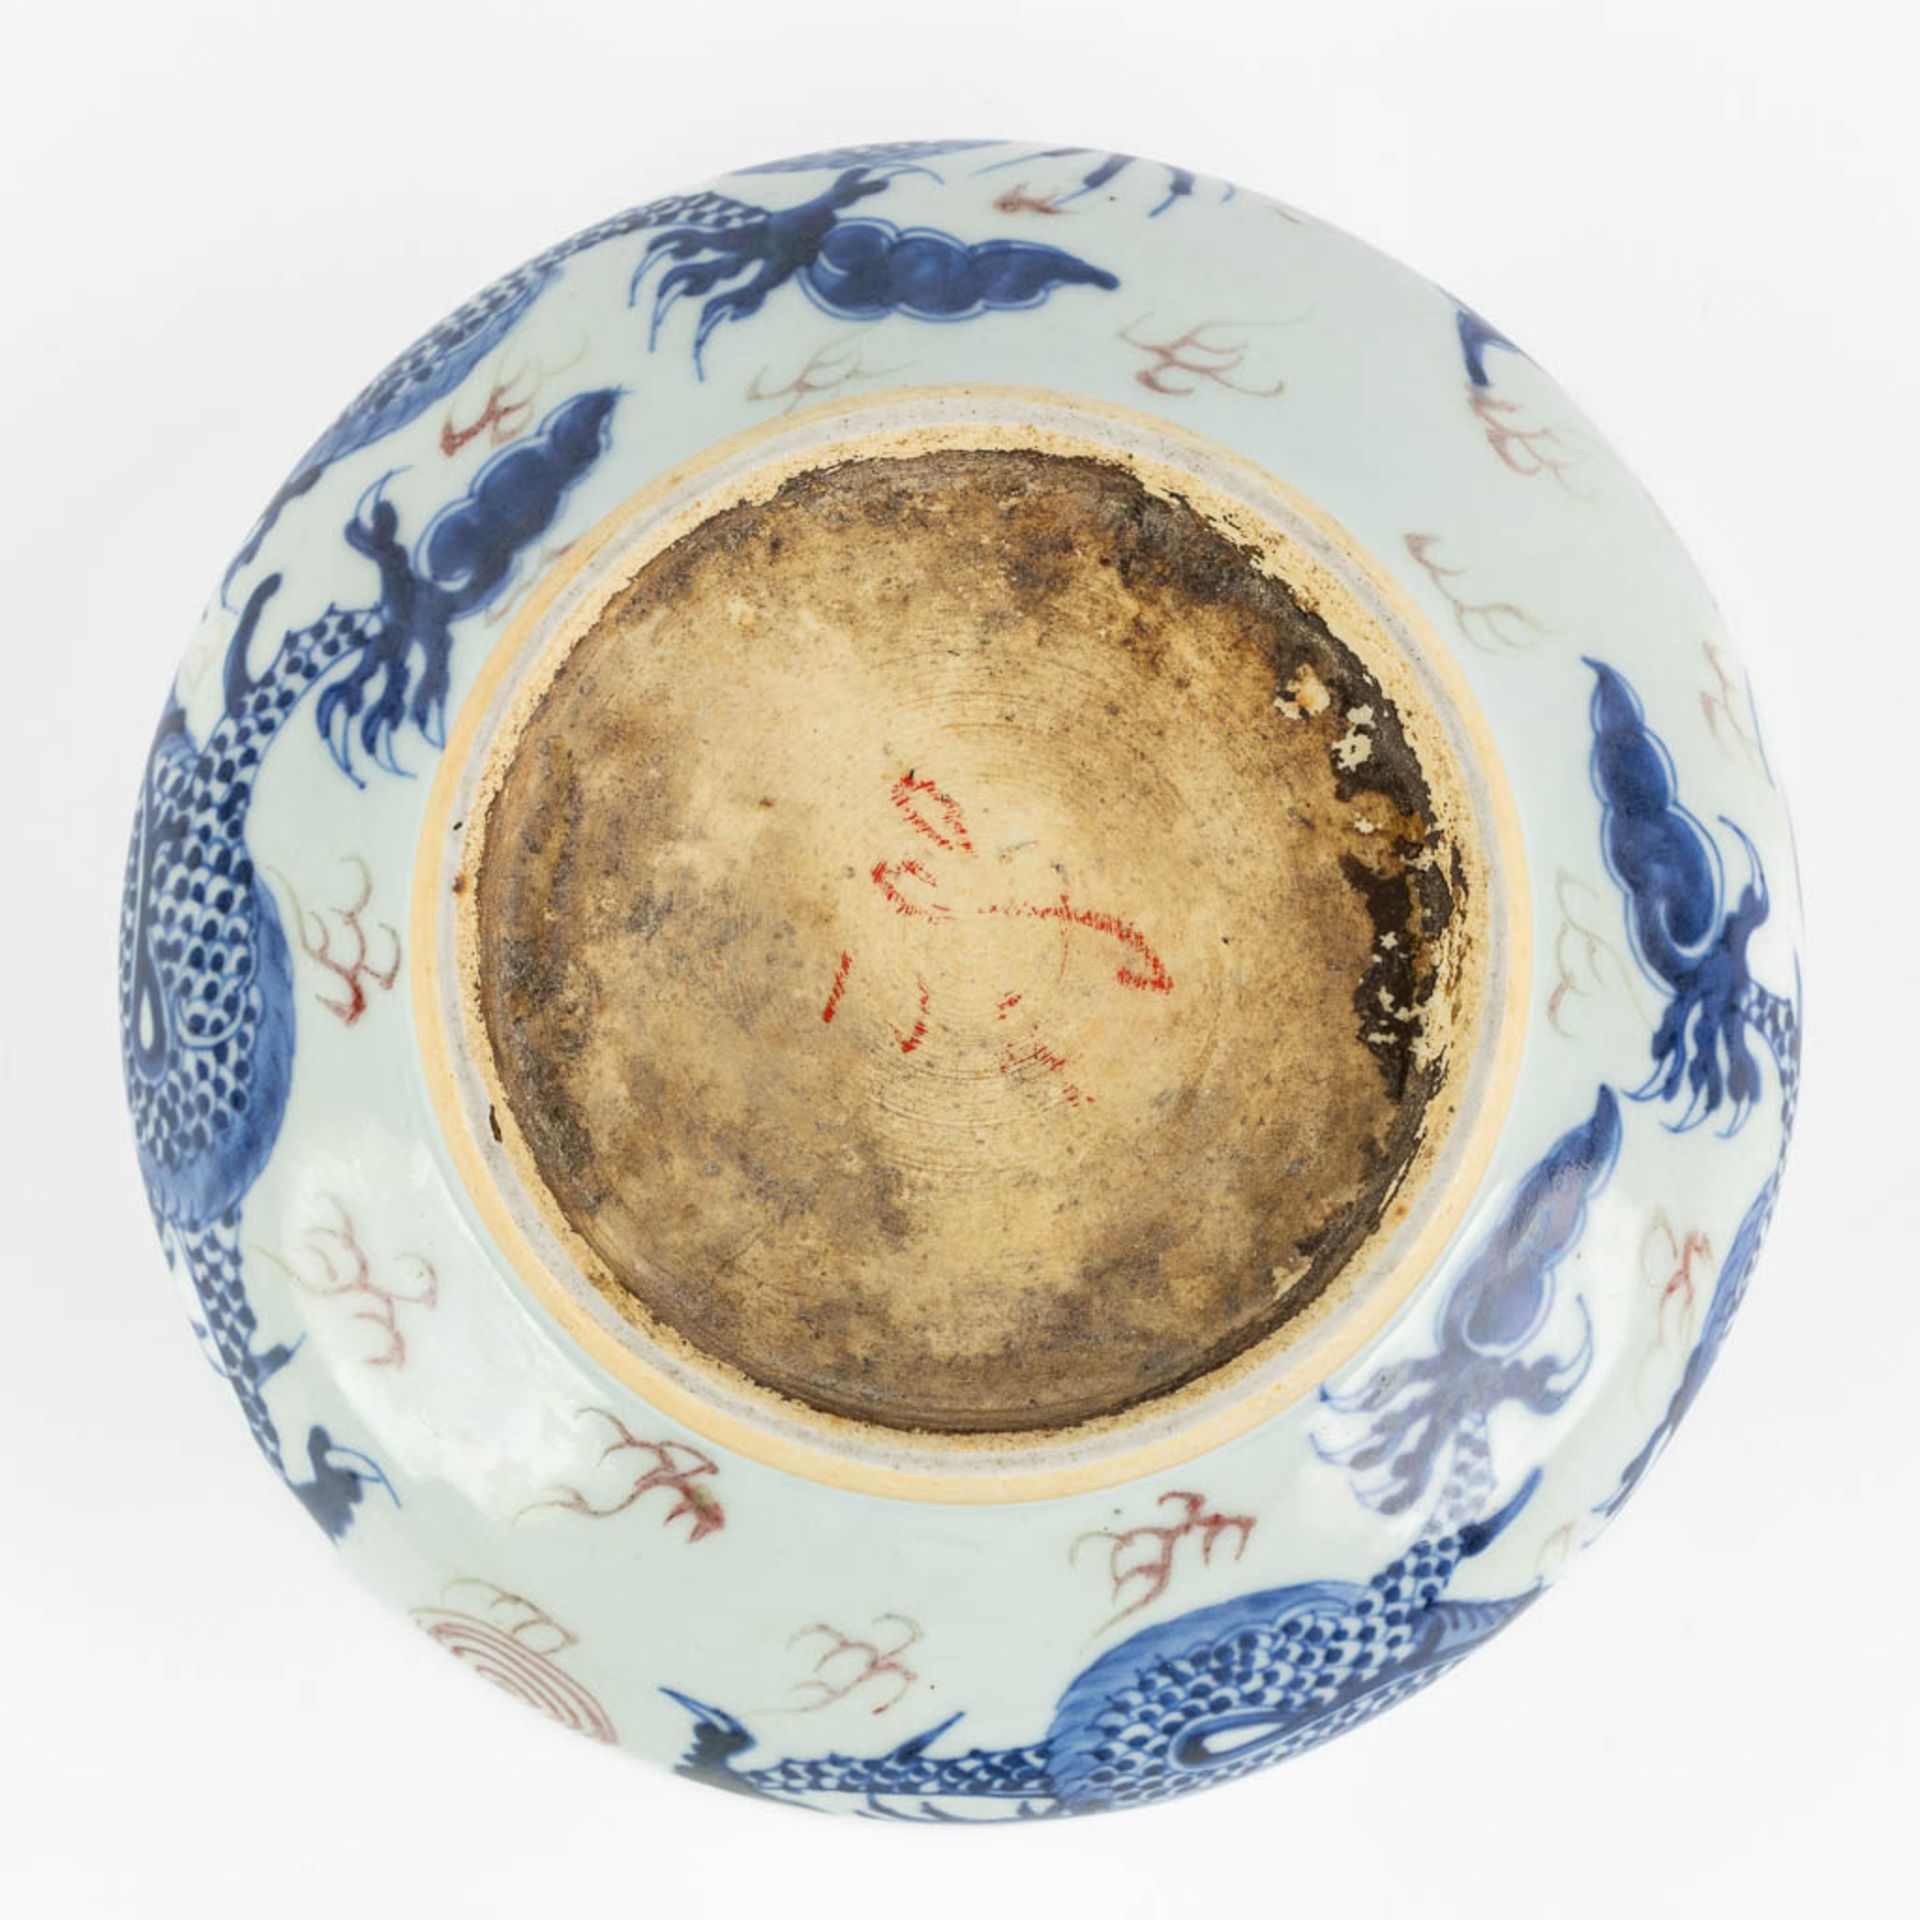 A Chinese cencer with a blue-white and red dragon decor. 19th C. (H:11 x D:21,5 cm) - Image 9 of 11